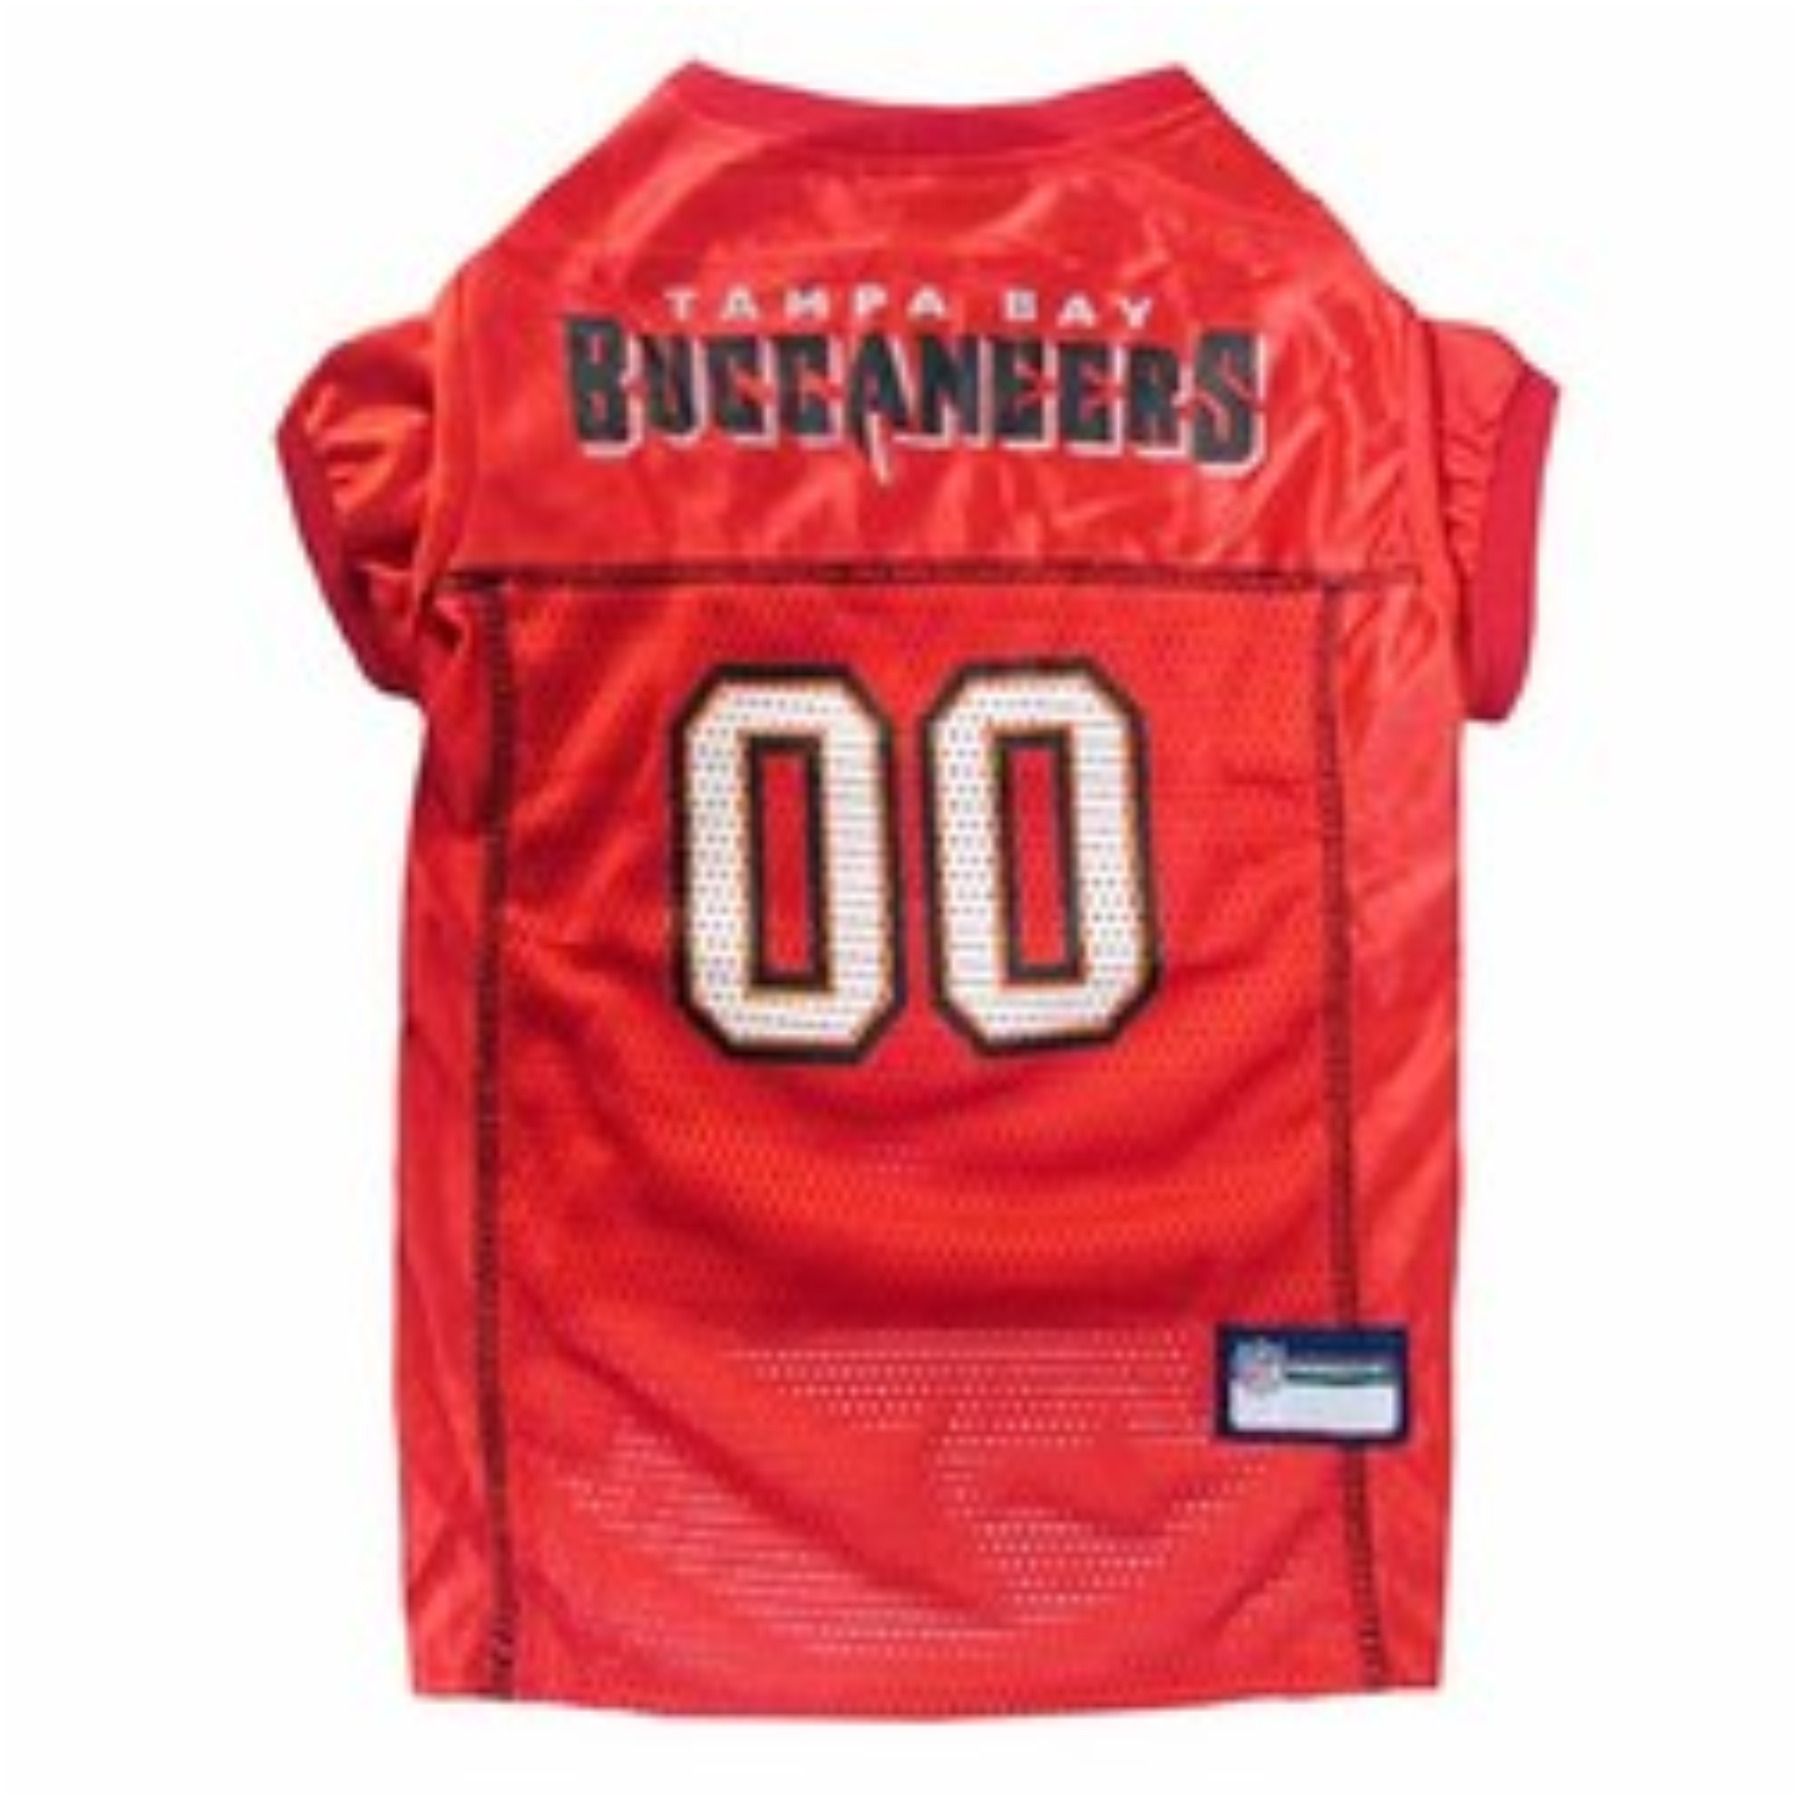 Tampa Bay Buccaneers Dog Jersey